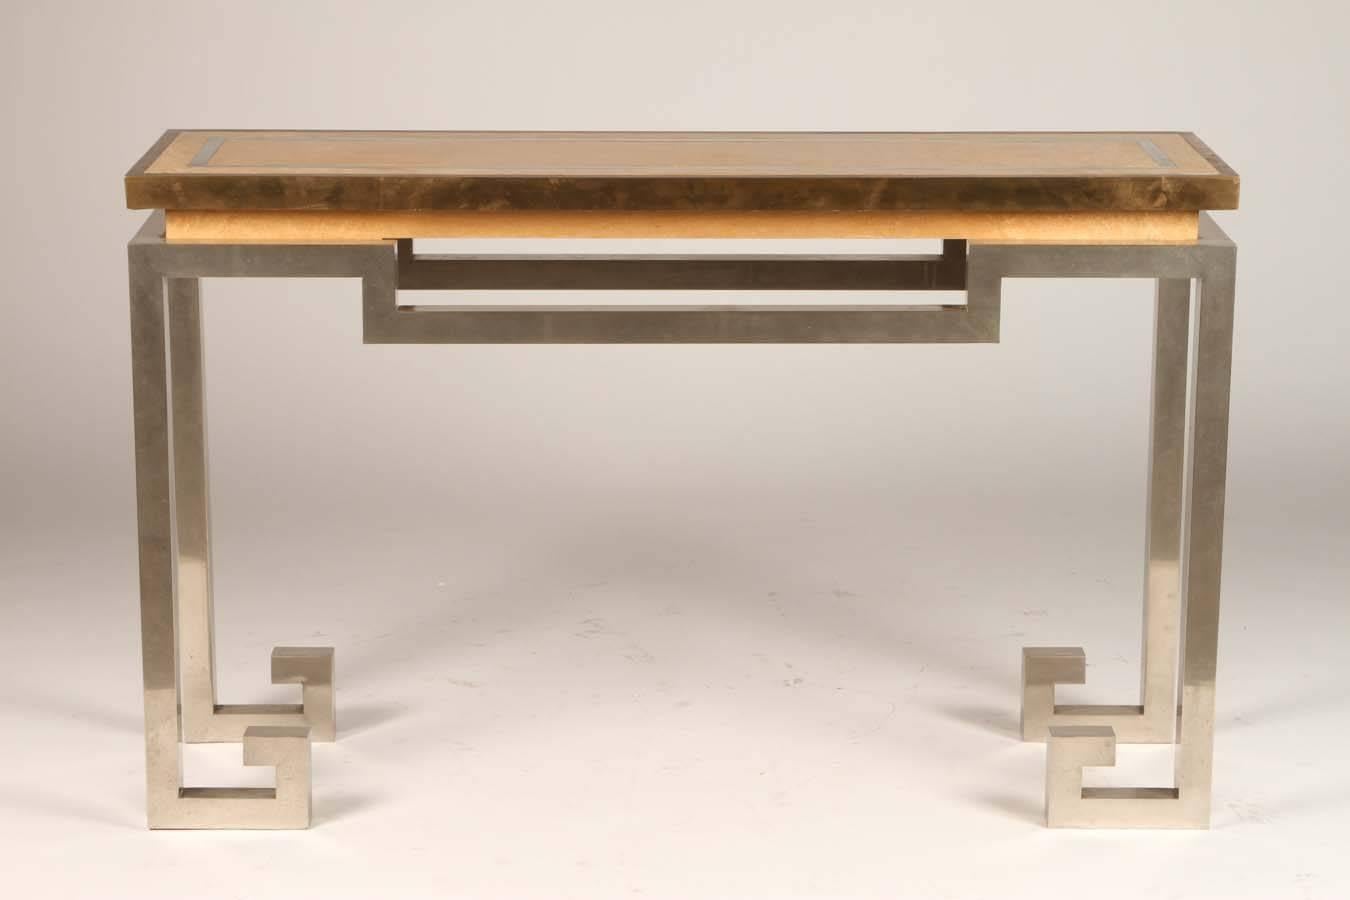 20th Century Stainless Steel, Brass, and Oak Console Table Attributed to Jansen